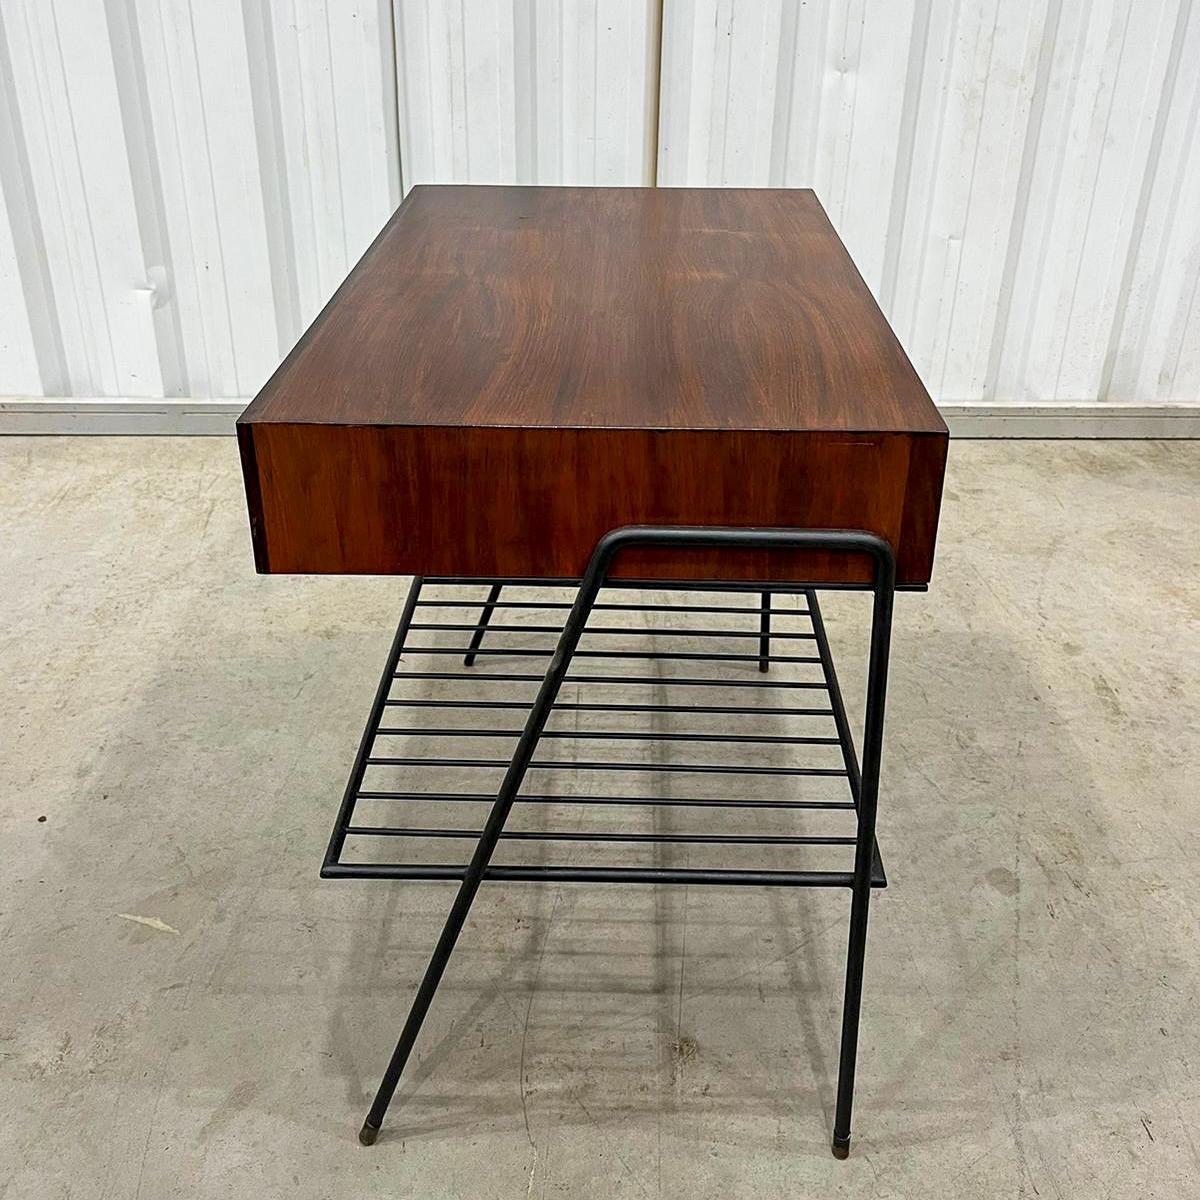 Brazilian Modern Side table in Hardwood and Metal, Unknown, c. 1950 For Sale 6